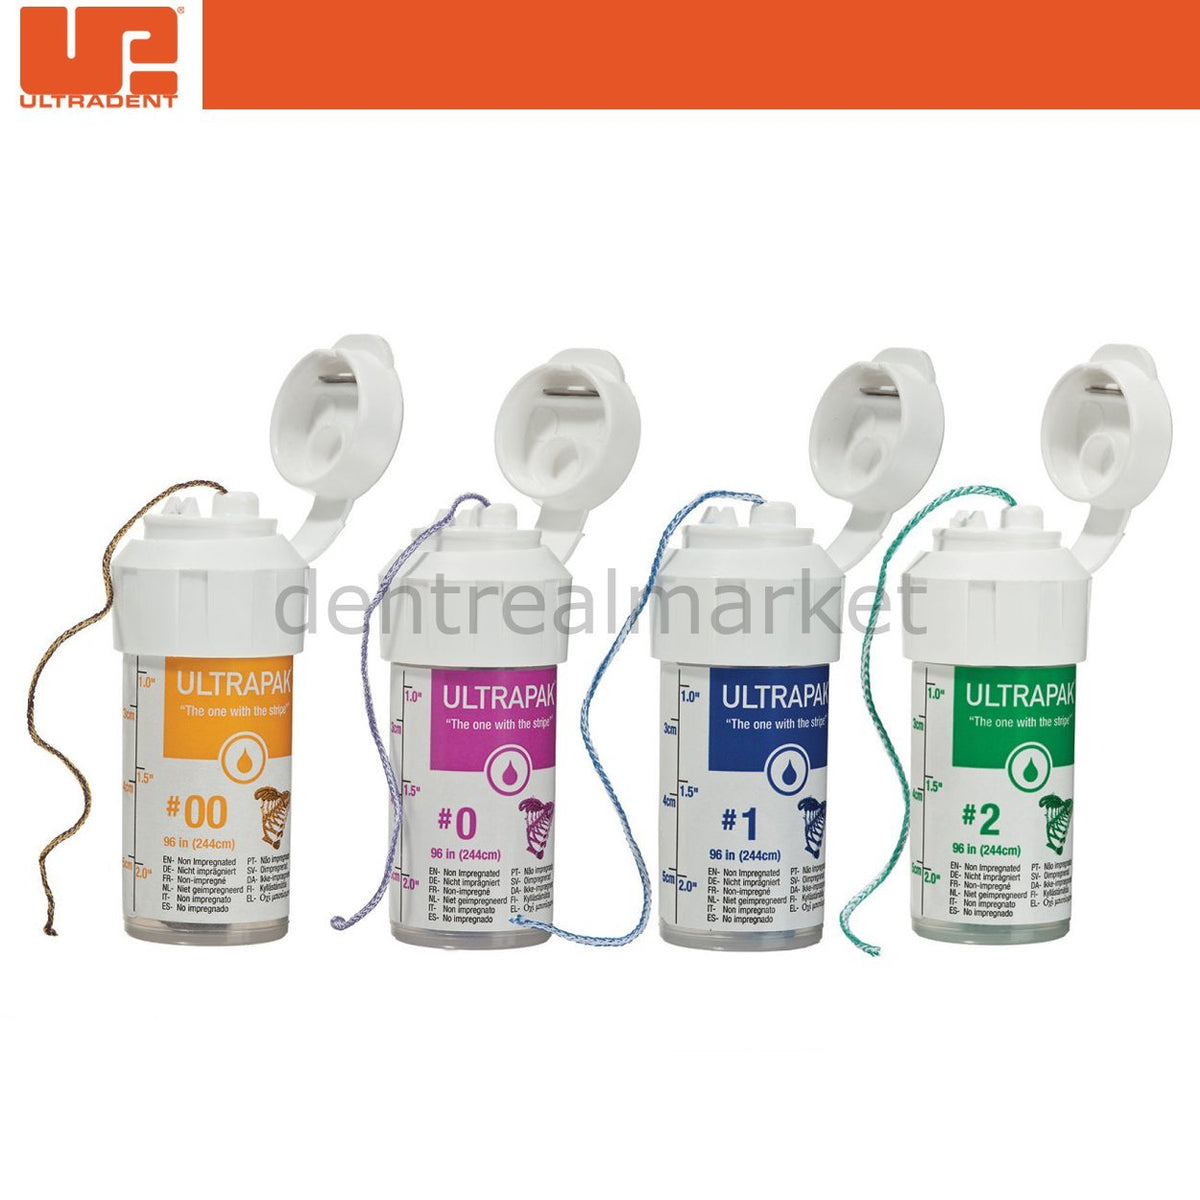 DentrealStore - Ultradent Ultrapak and Ultrapak E Knitted & Epinephrine Knitted Cord